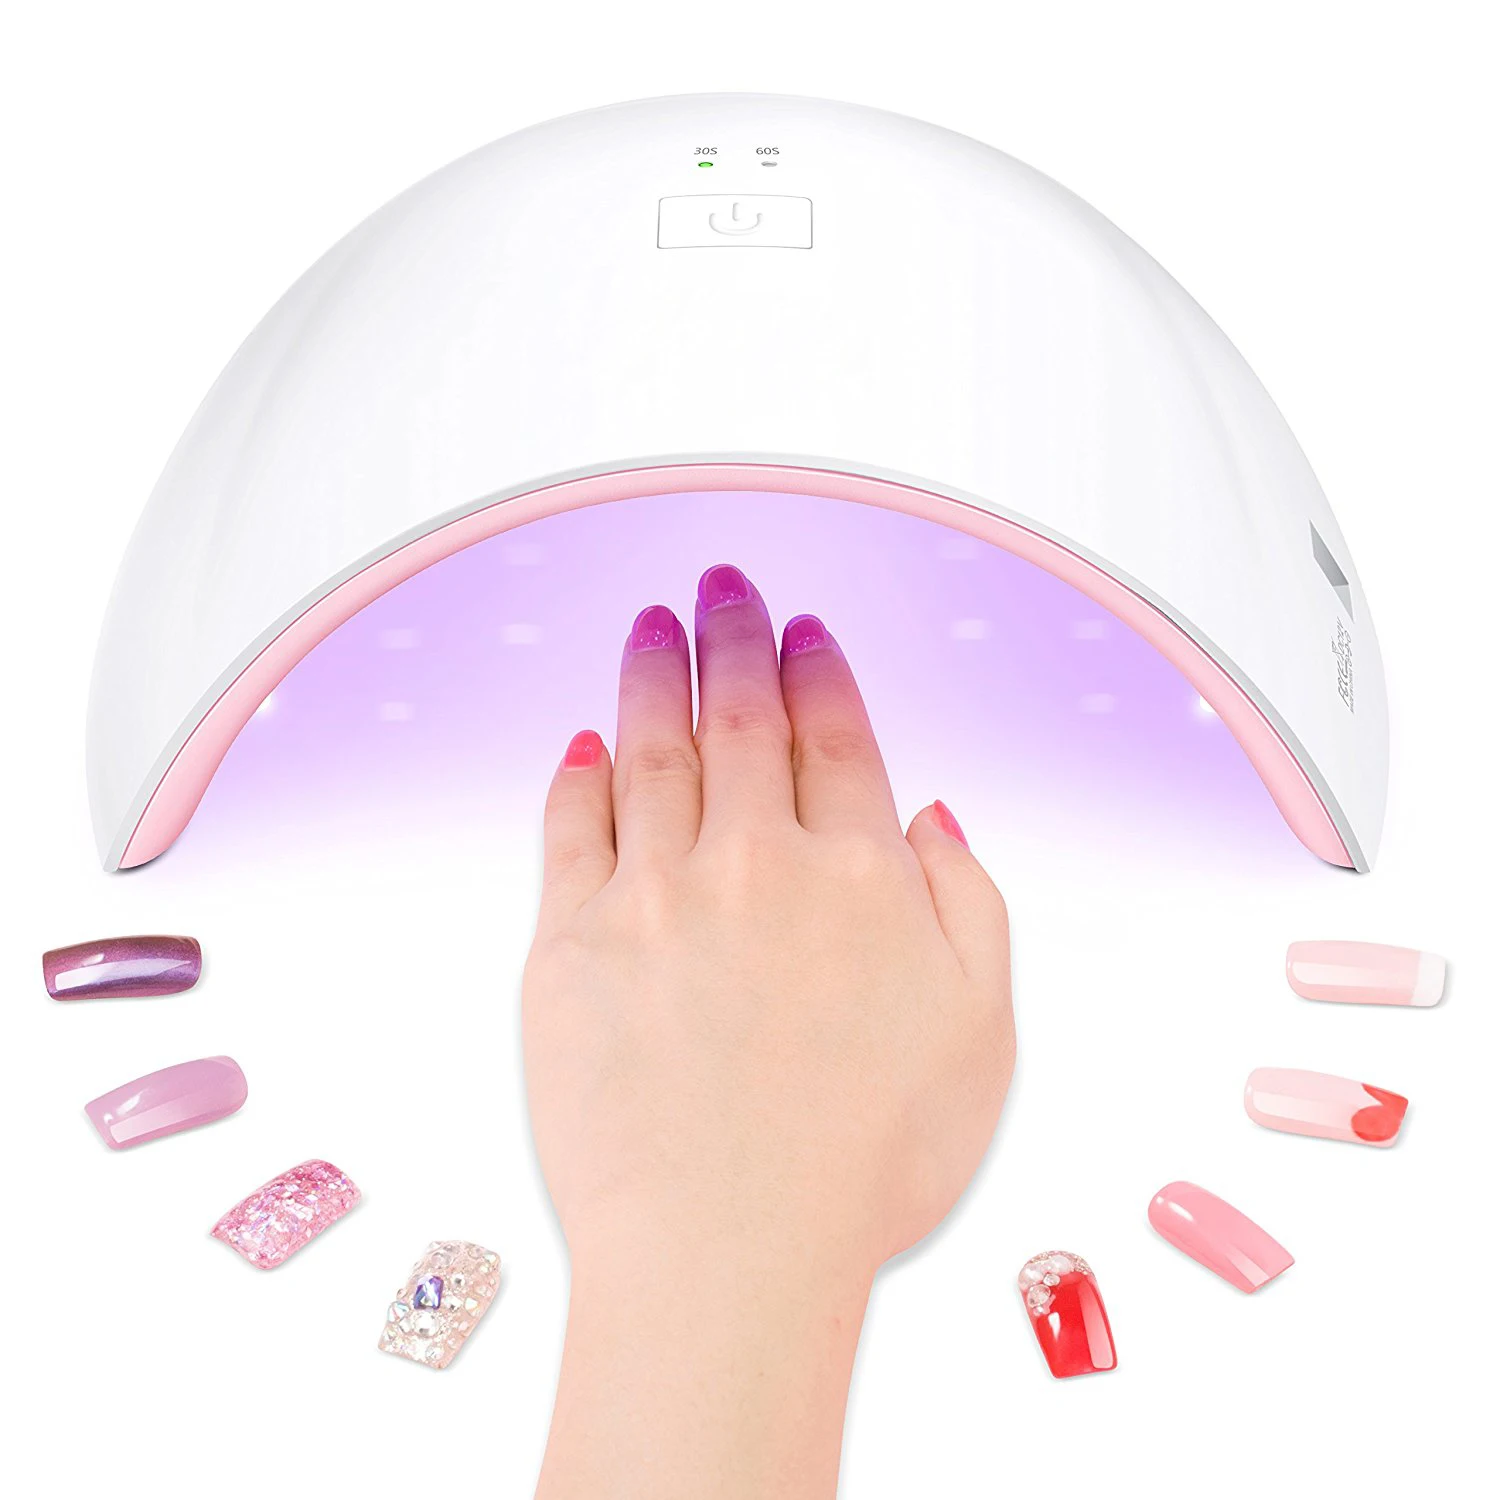 

OEM private label 36W UV Lamp 48w Nail Gel Polish Curing Lamp Dryer for Nail Gel - Home Use and Professional Beauty Salon, White or customized